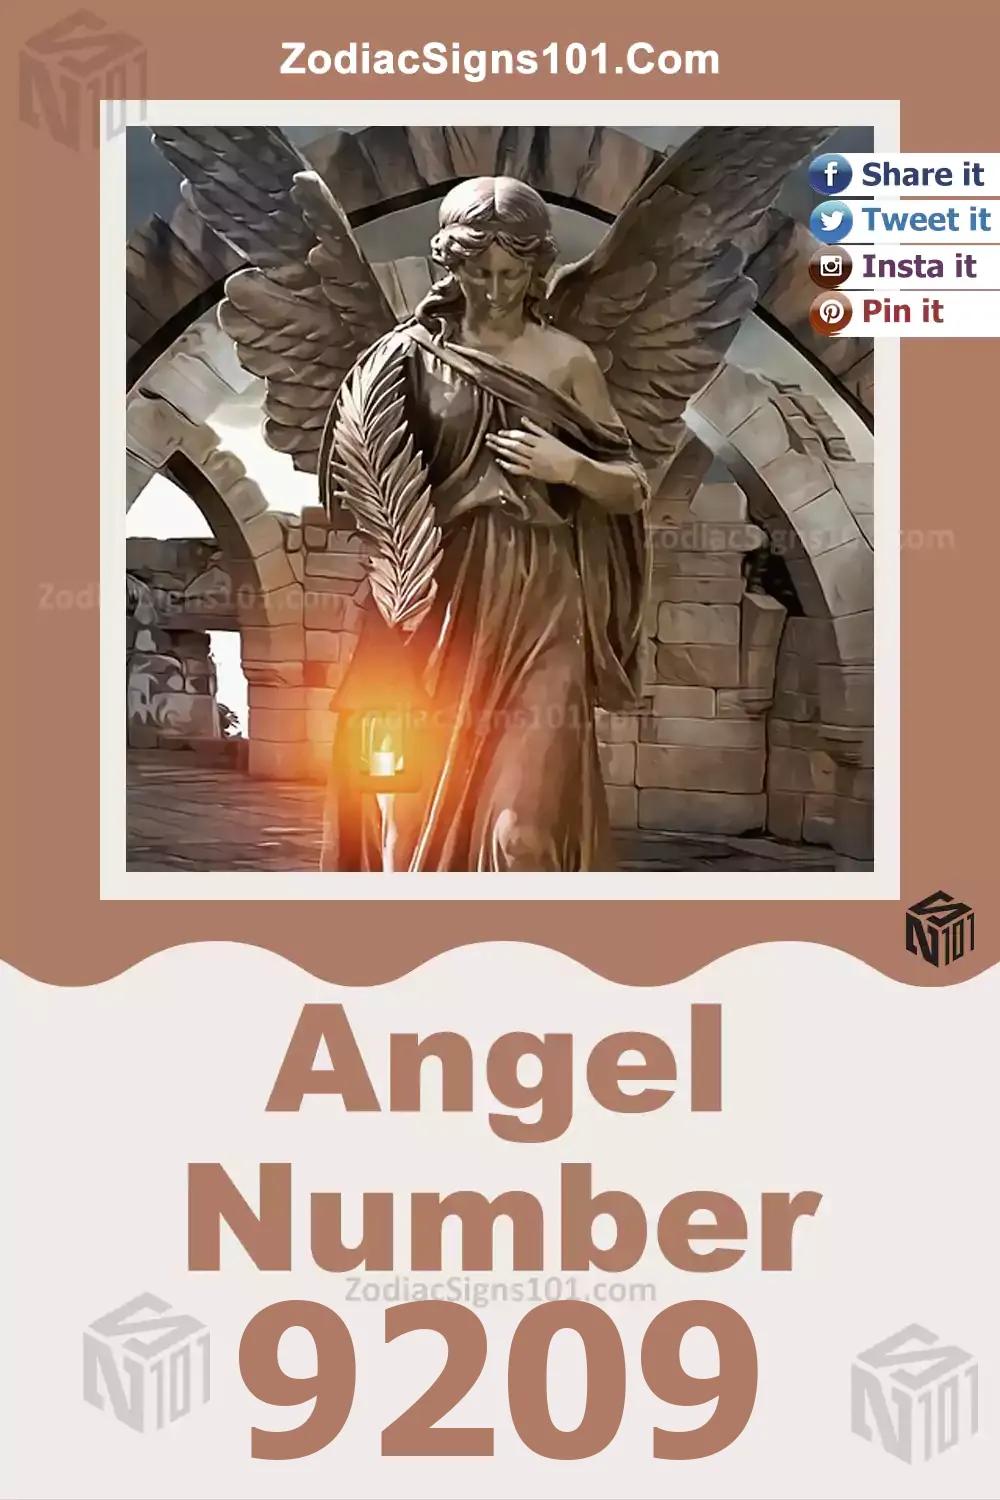 9209 Angel Number Meaning